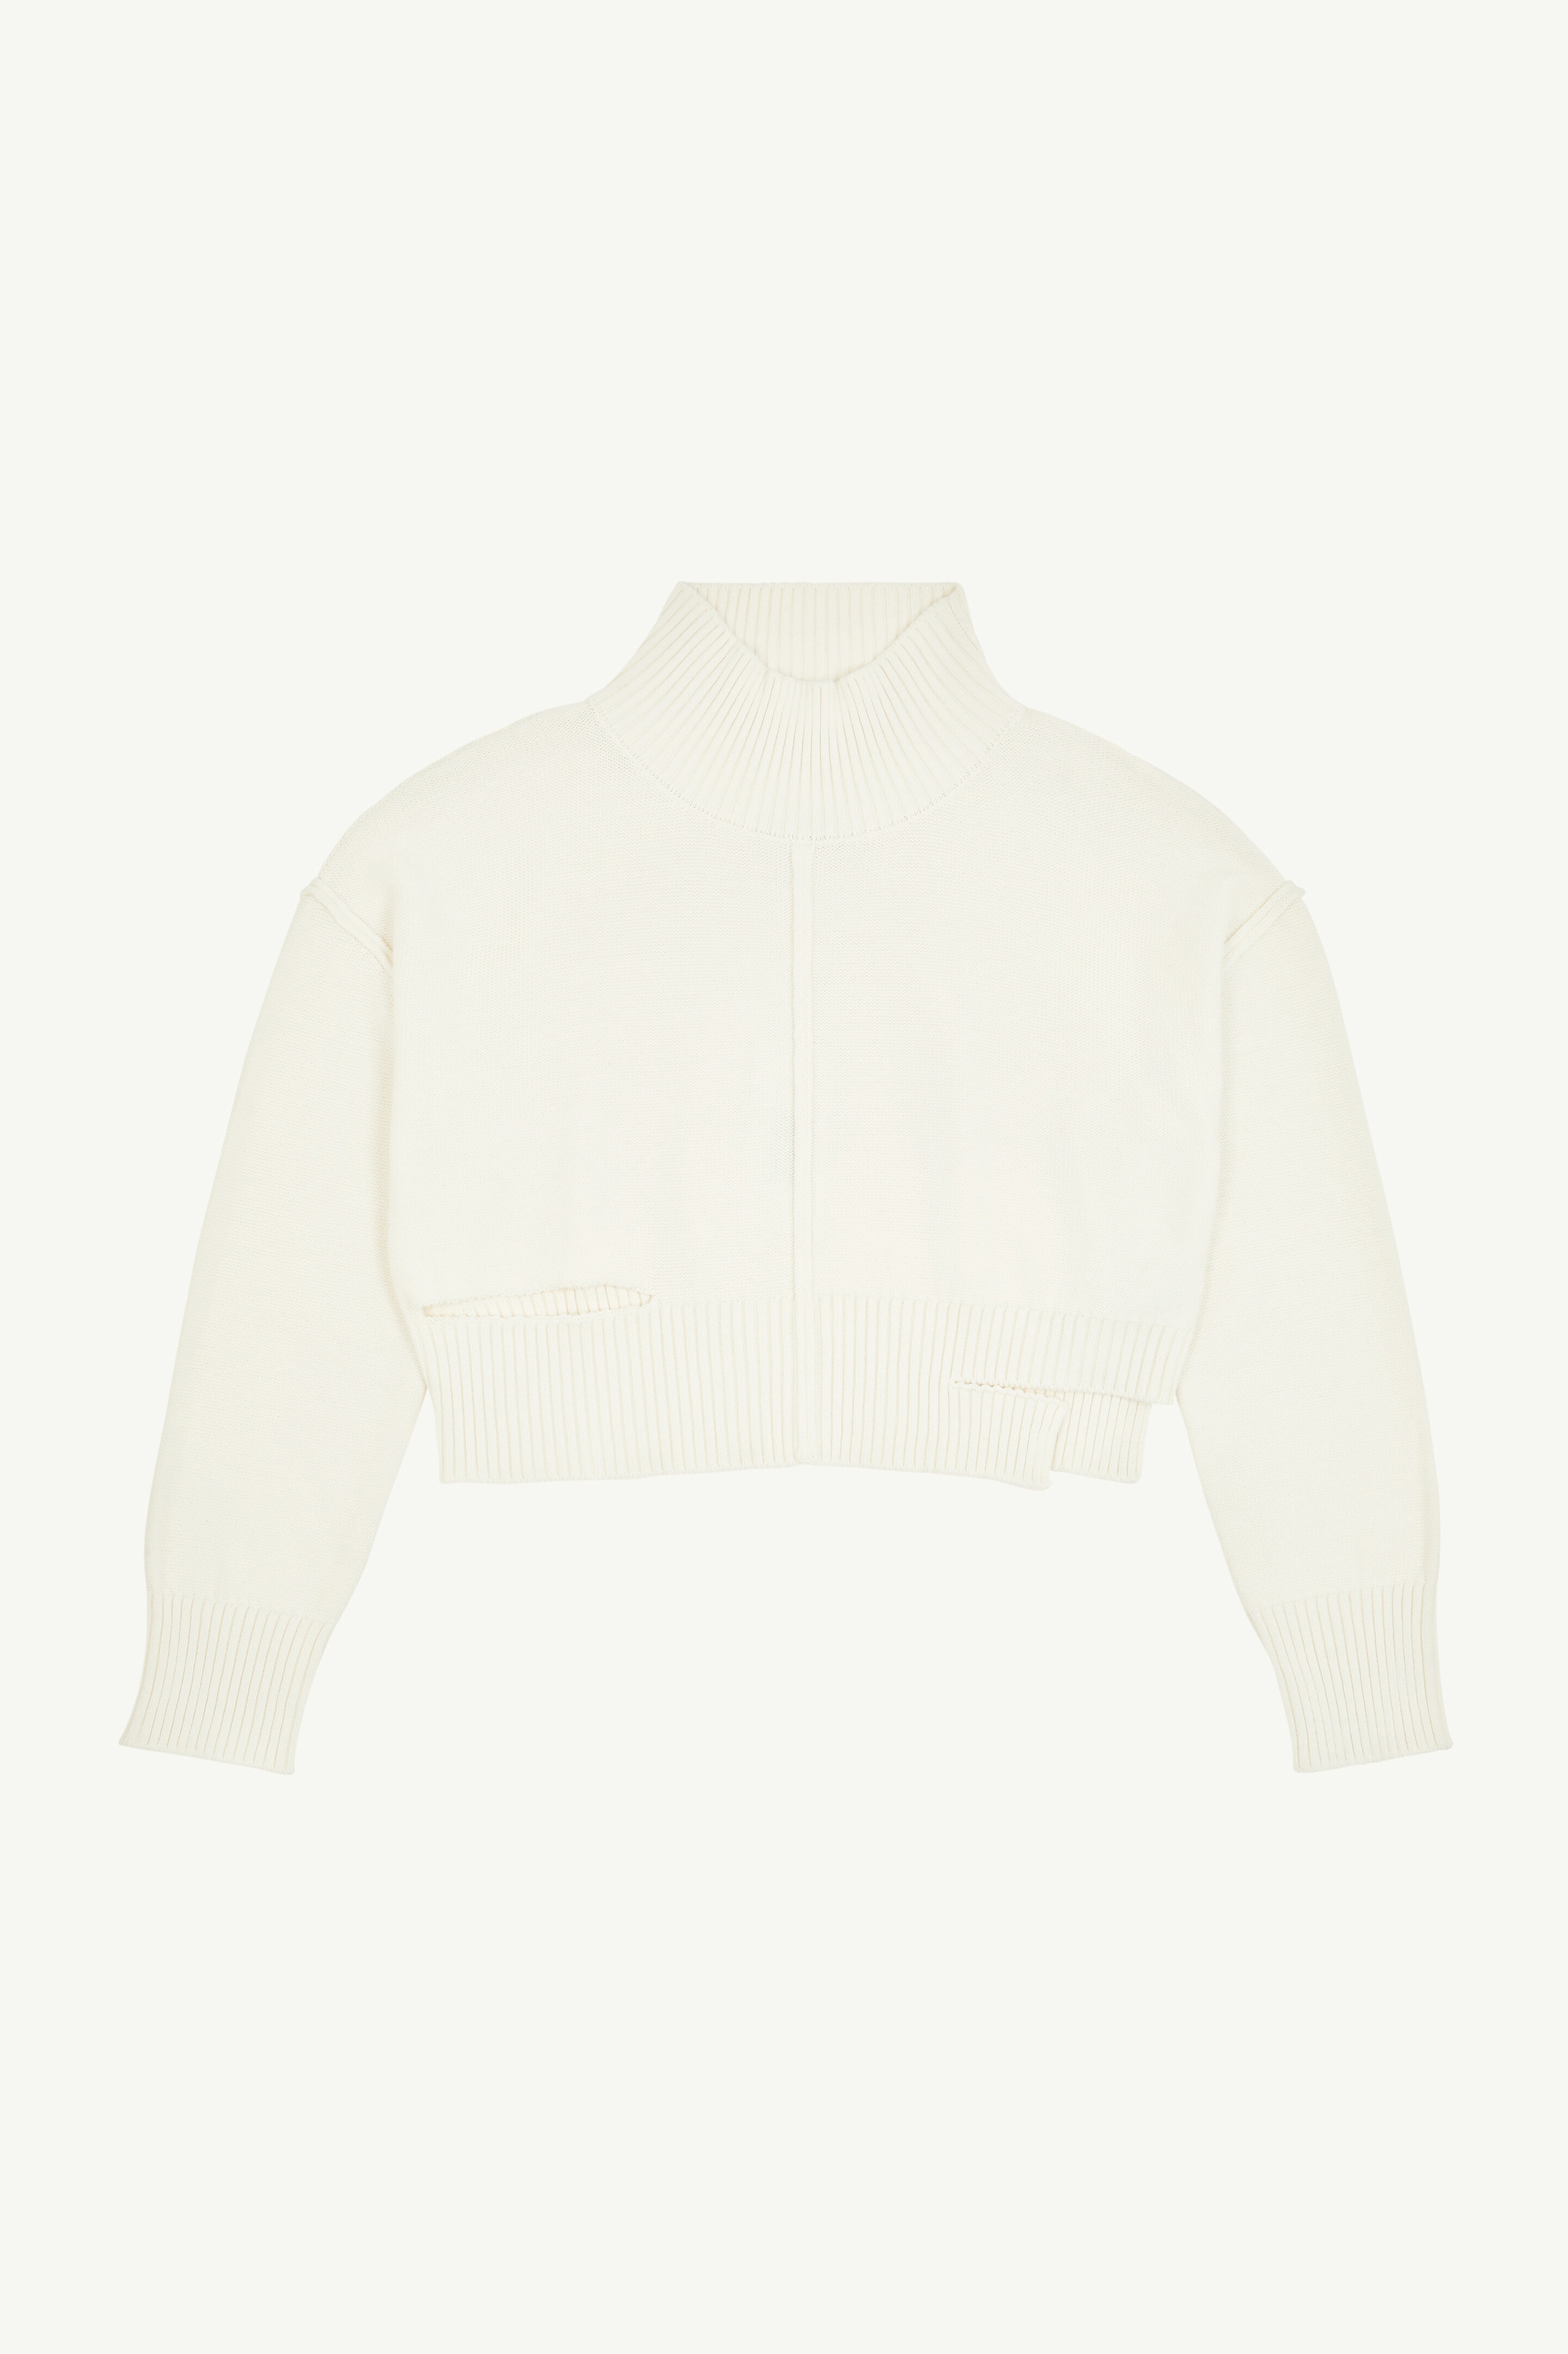 Gauge Off-White Boxy Distressed Jumper - 1